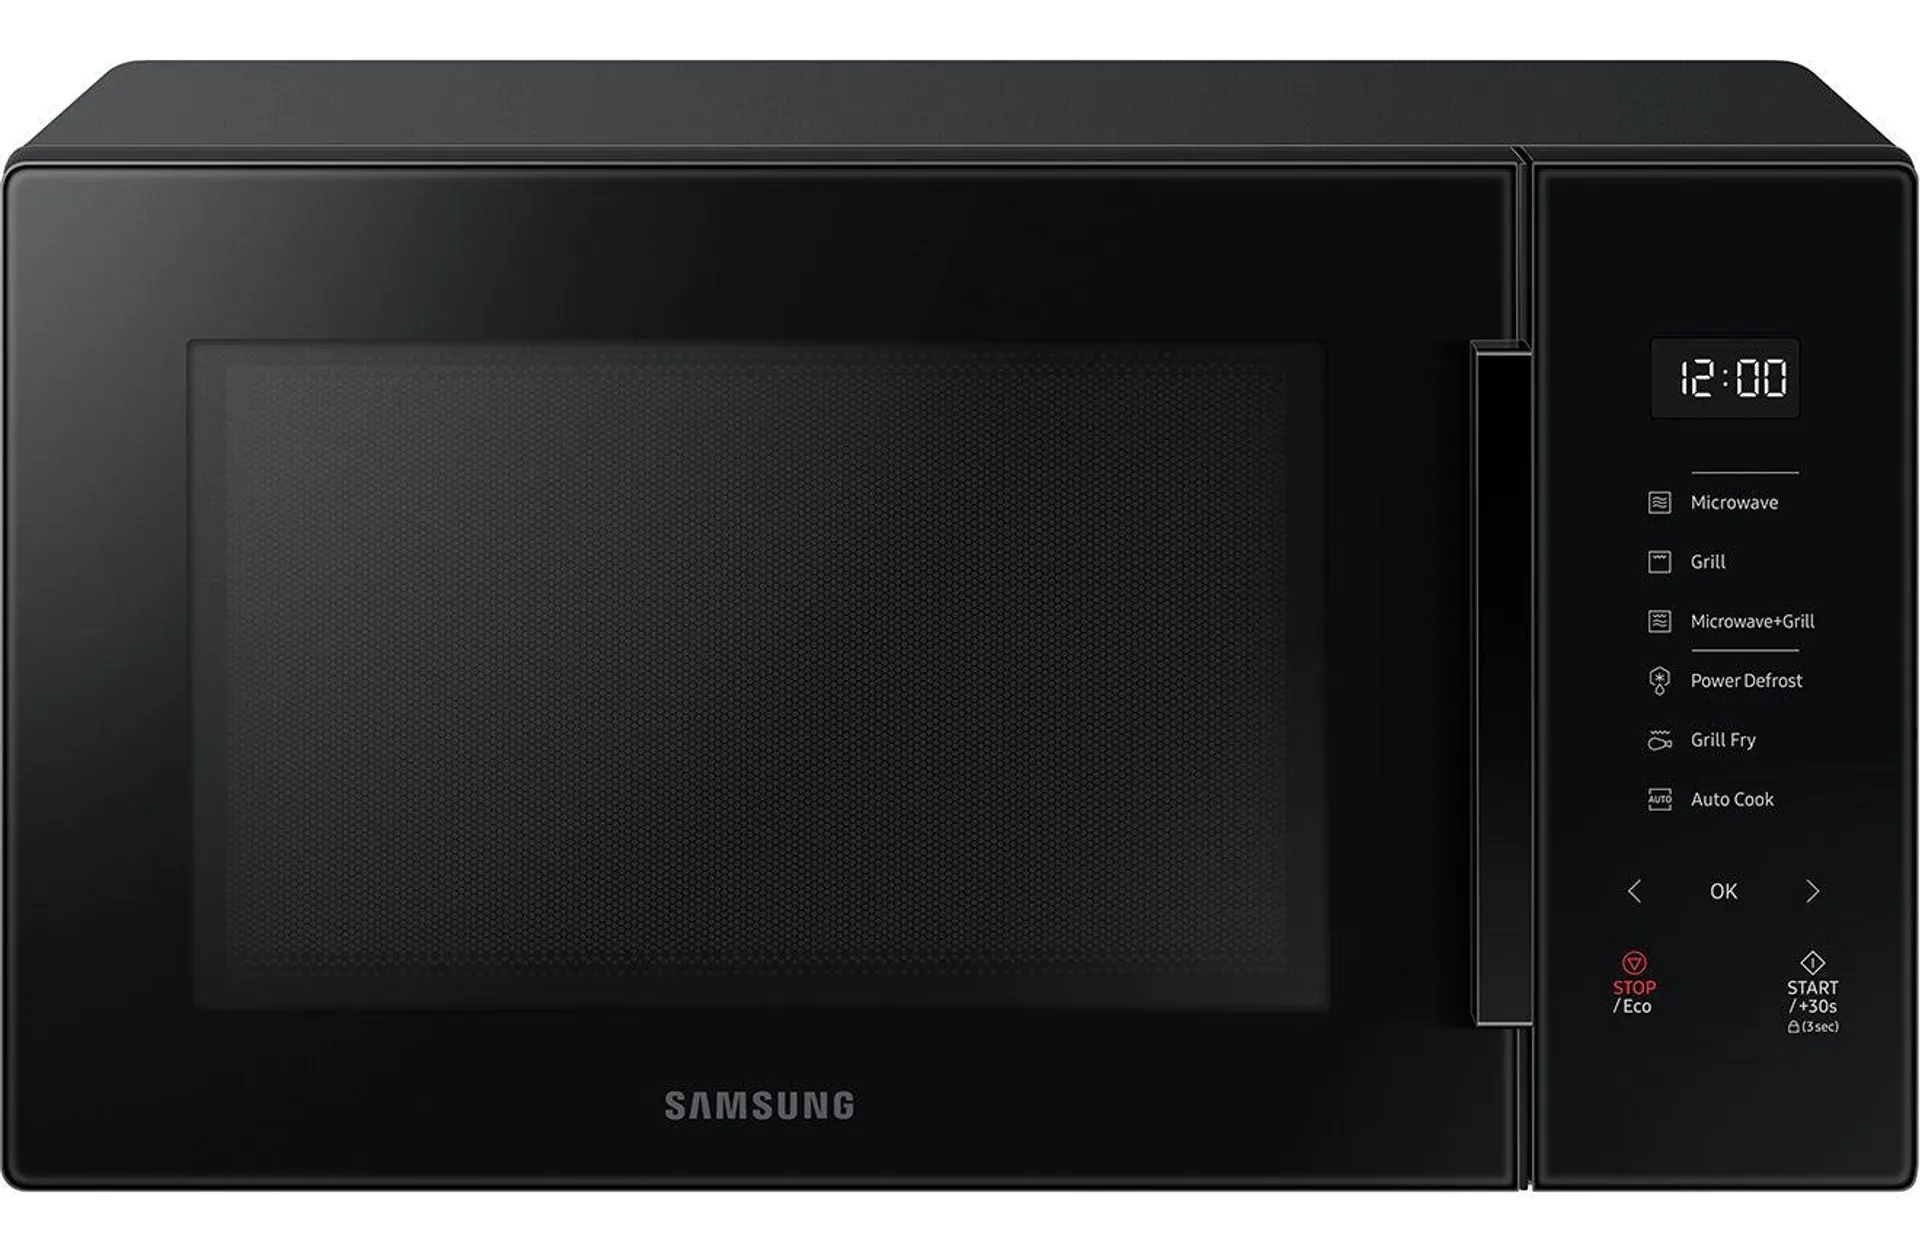 Samsung 30L Microwave Oven with Grill Fry - MG30T5068CK